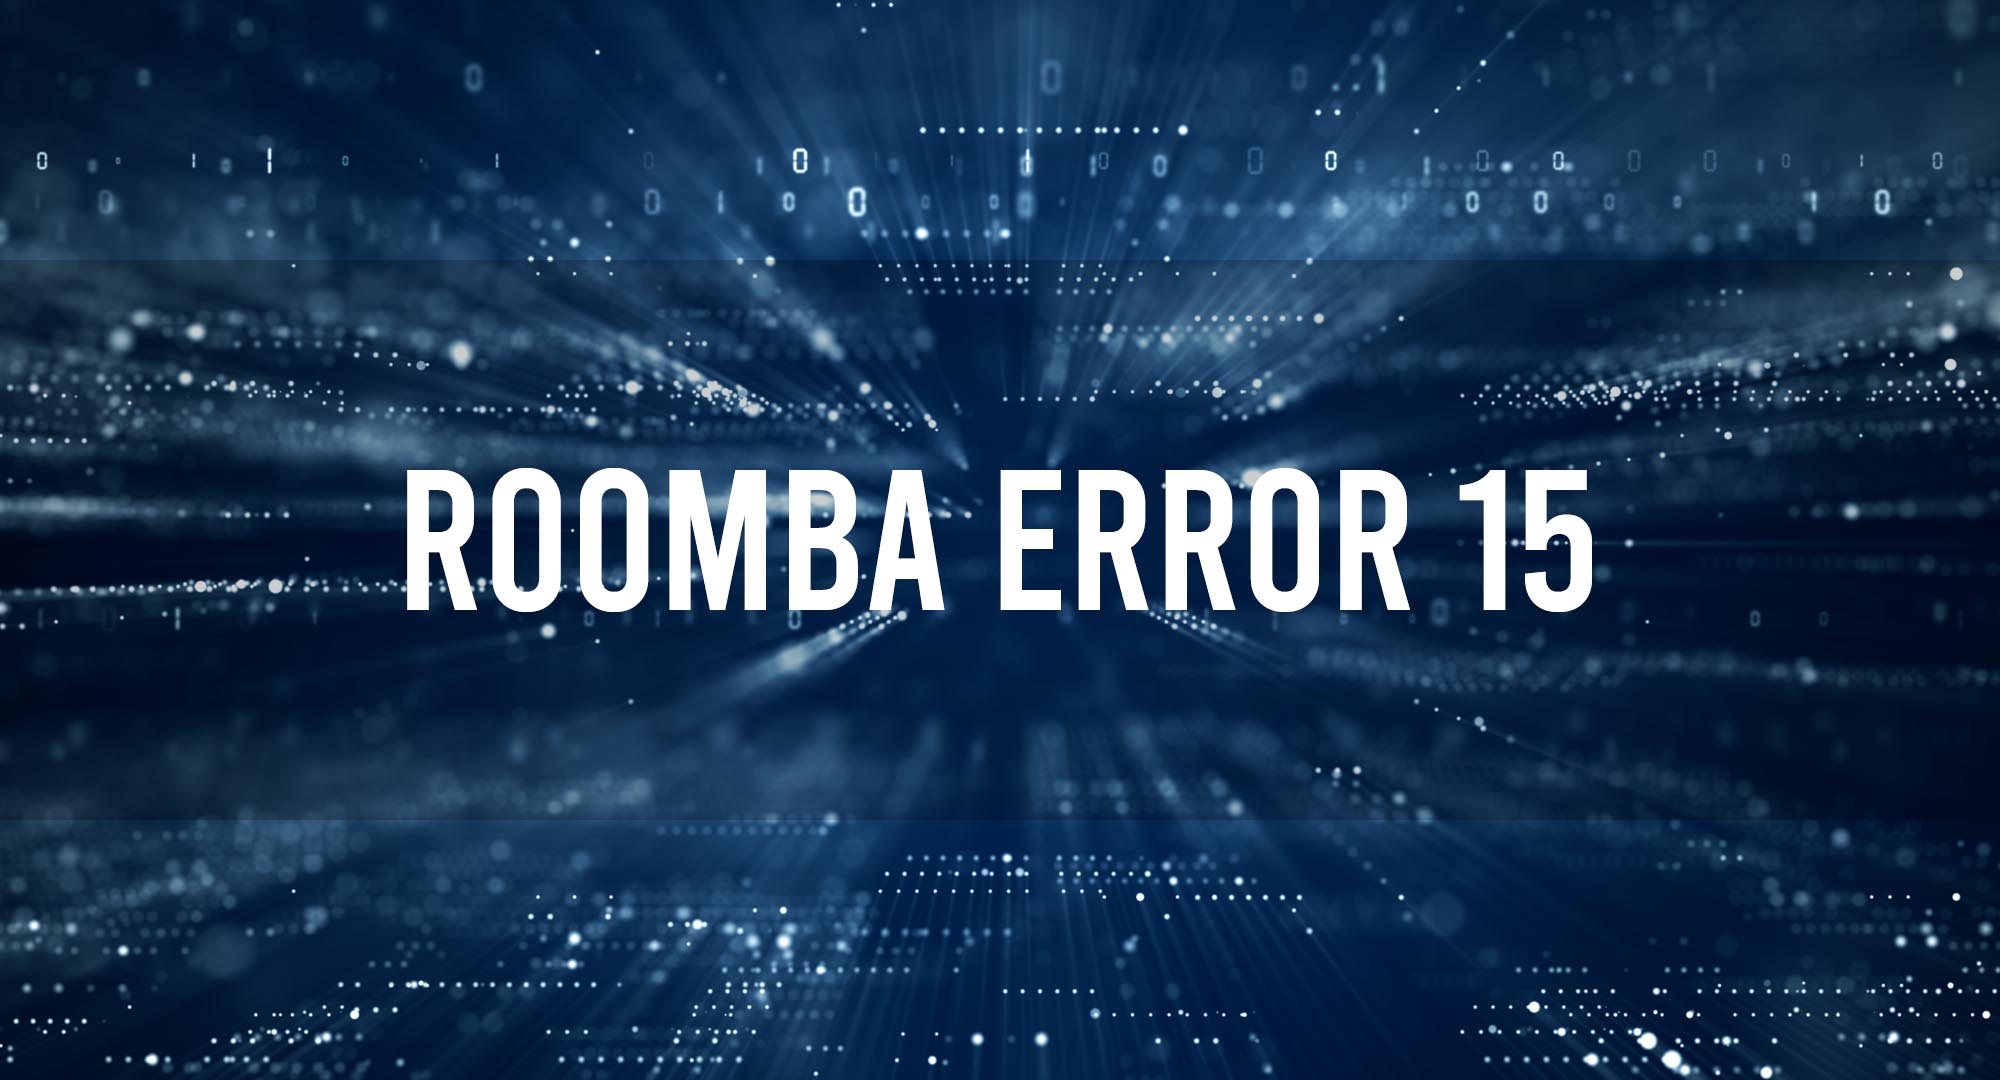 Roomba Error 15 – Check Your Roomba For Faulty Parts